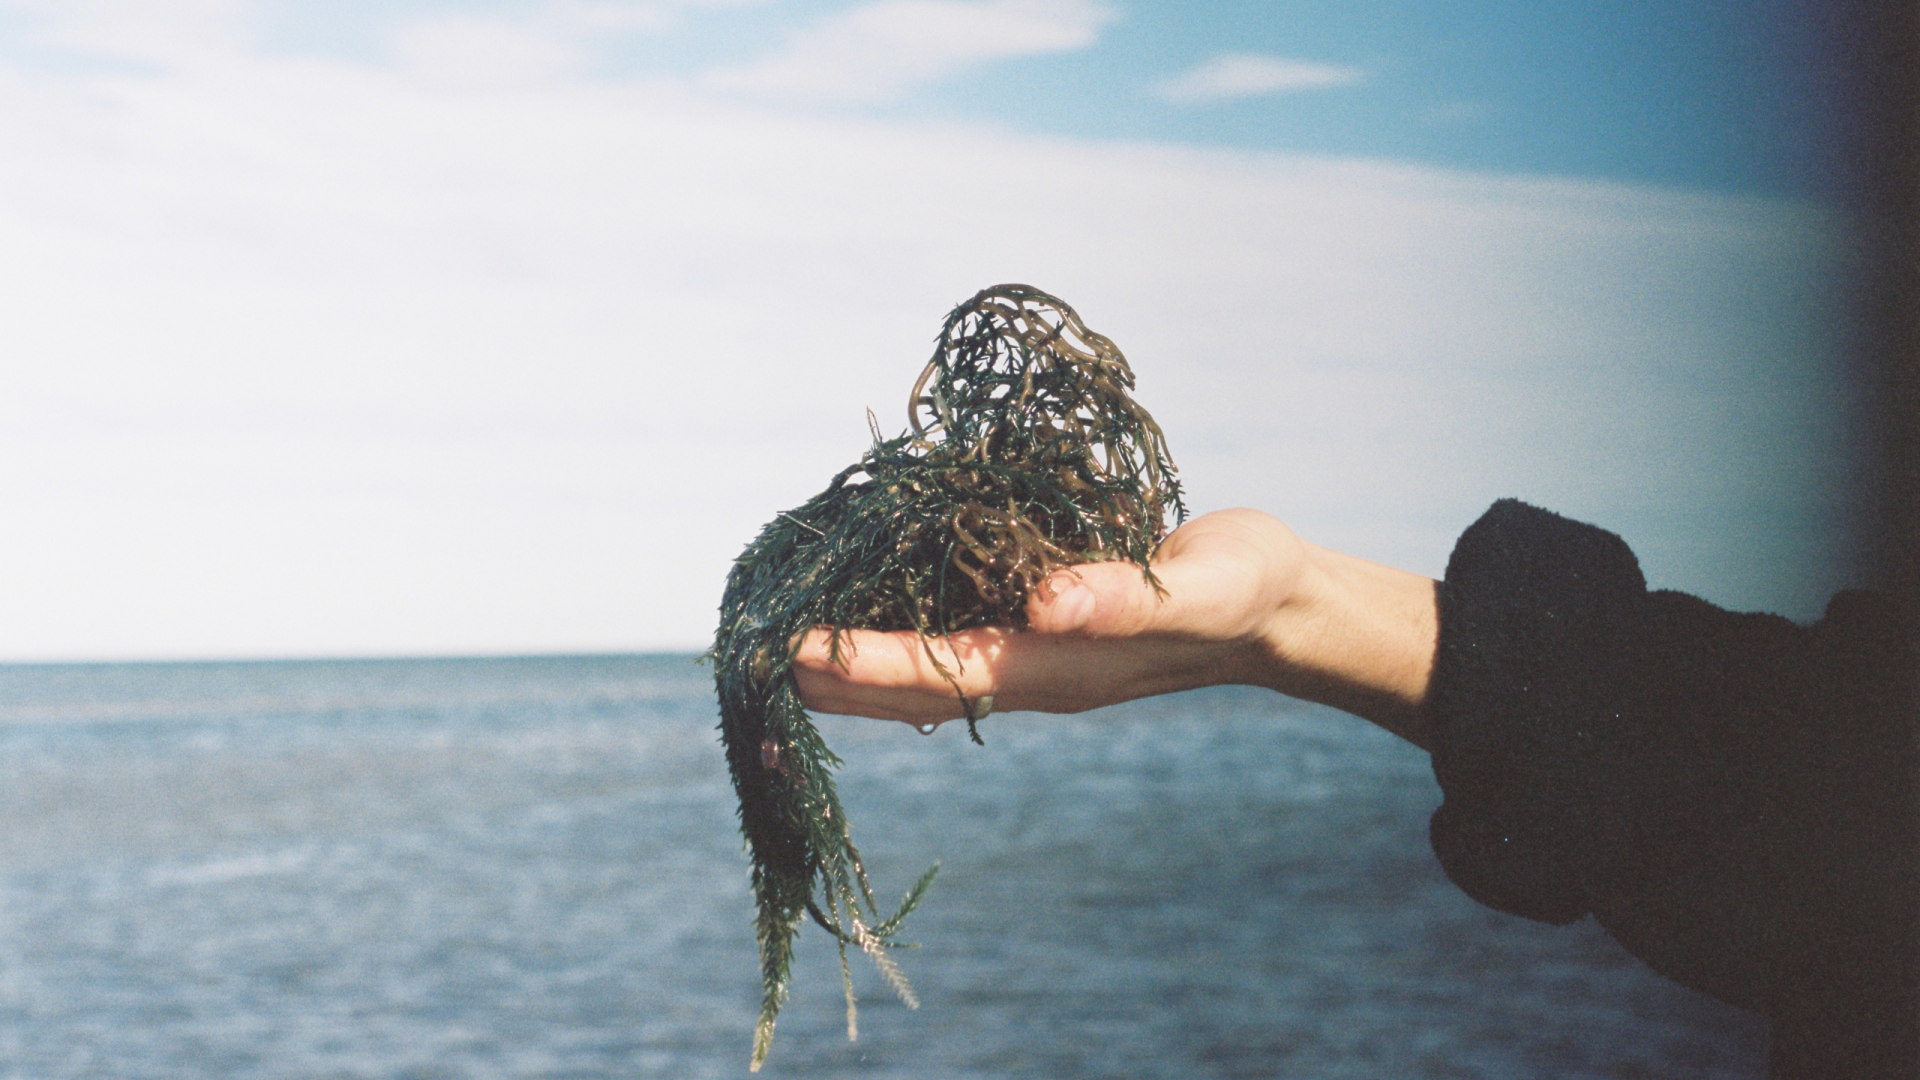 Photo of hand holding palm out flat with seaweed piled on top. Sea and sky in background.